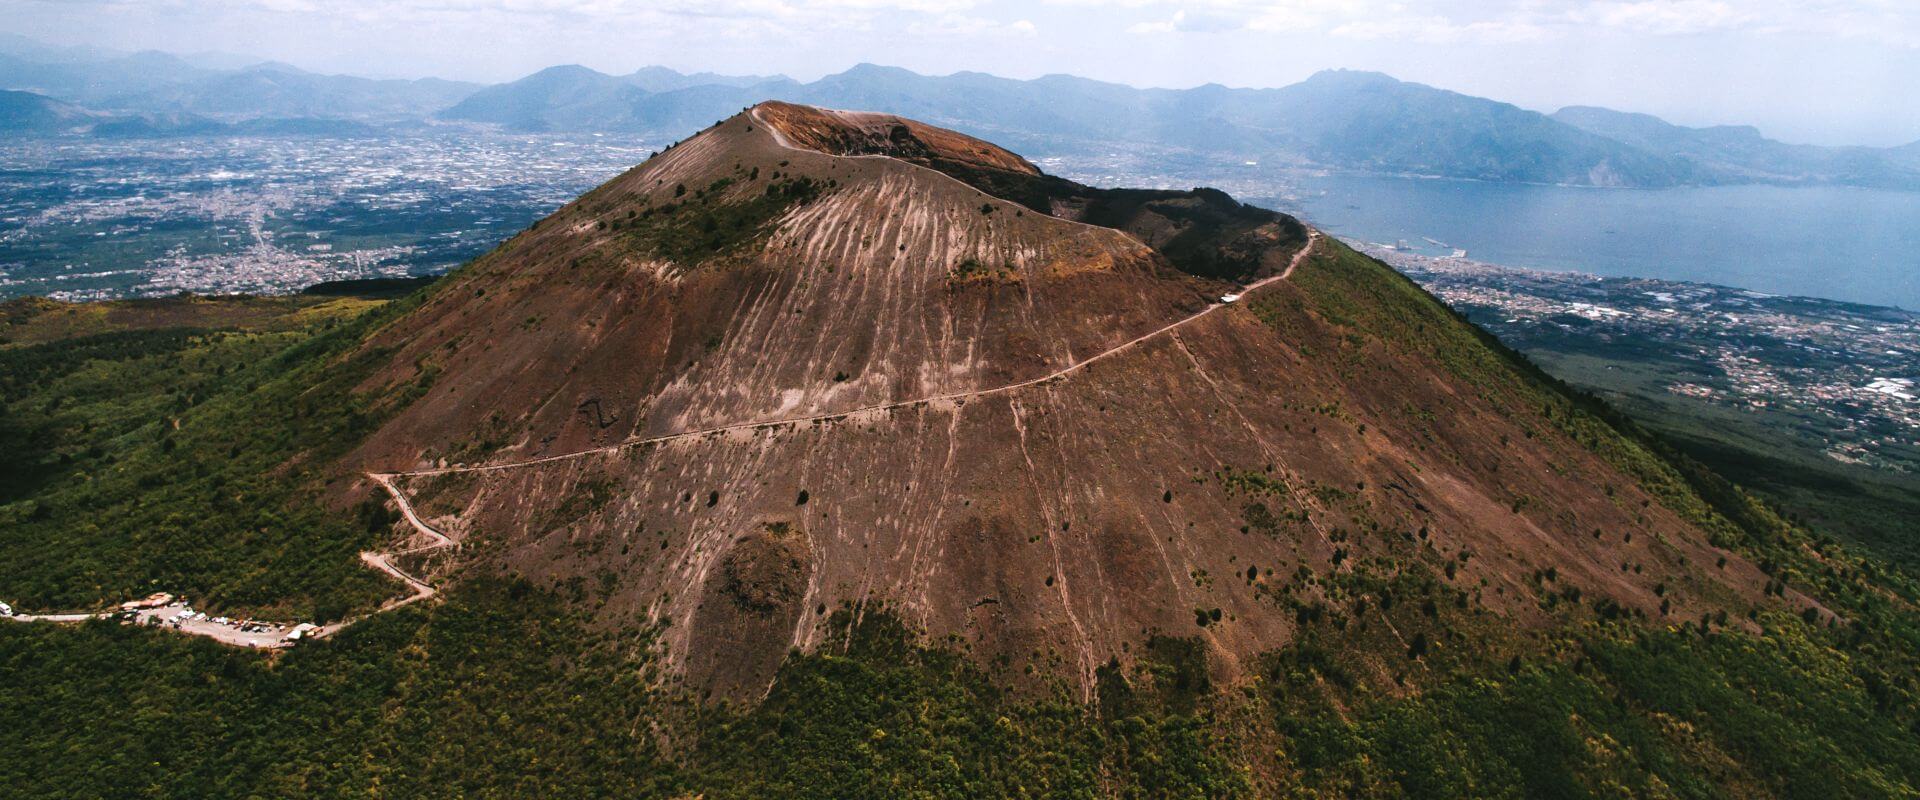 View of the Mt. Vesuvius from above with drone